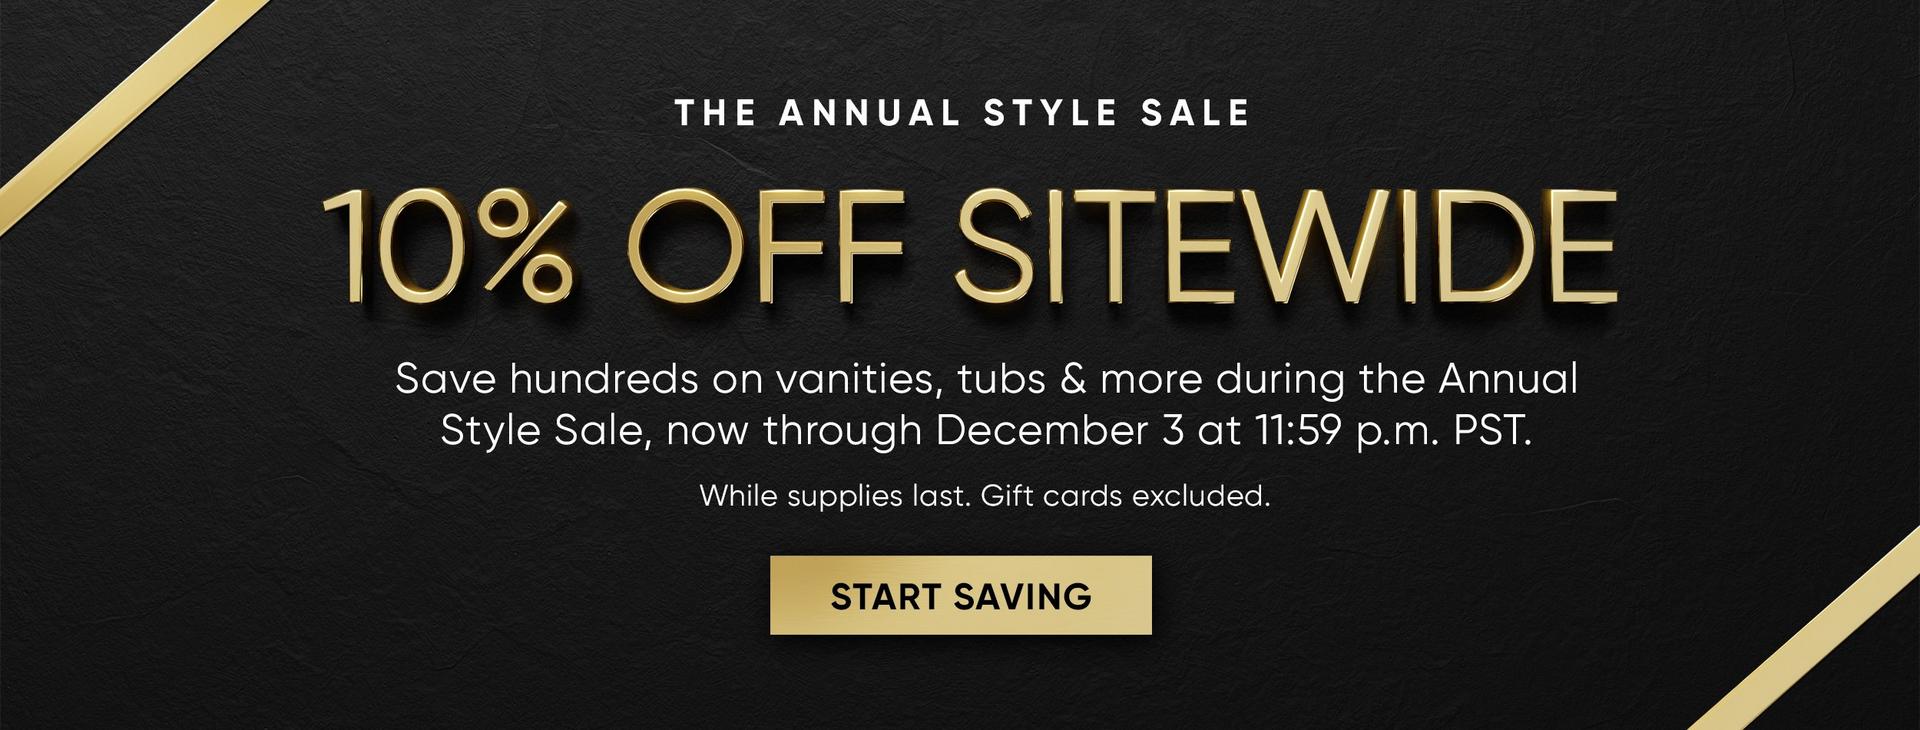 The Annual Style Sale - 10% Off Sitewide